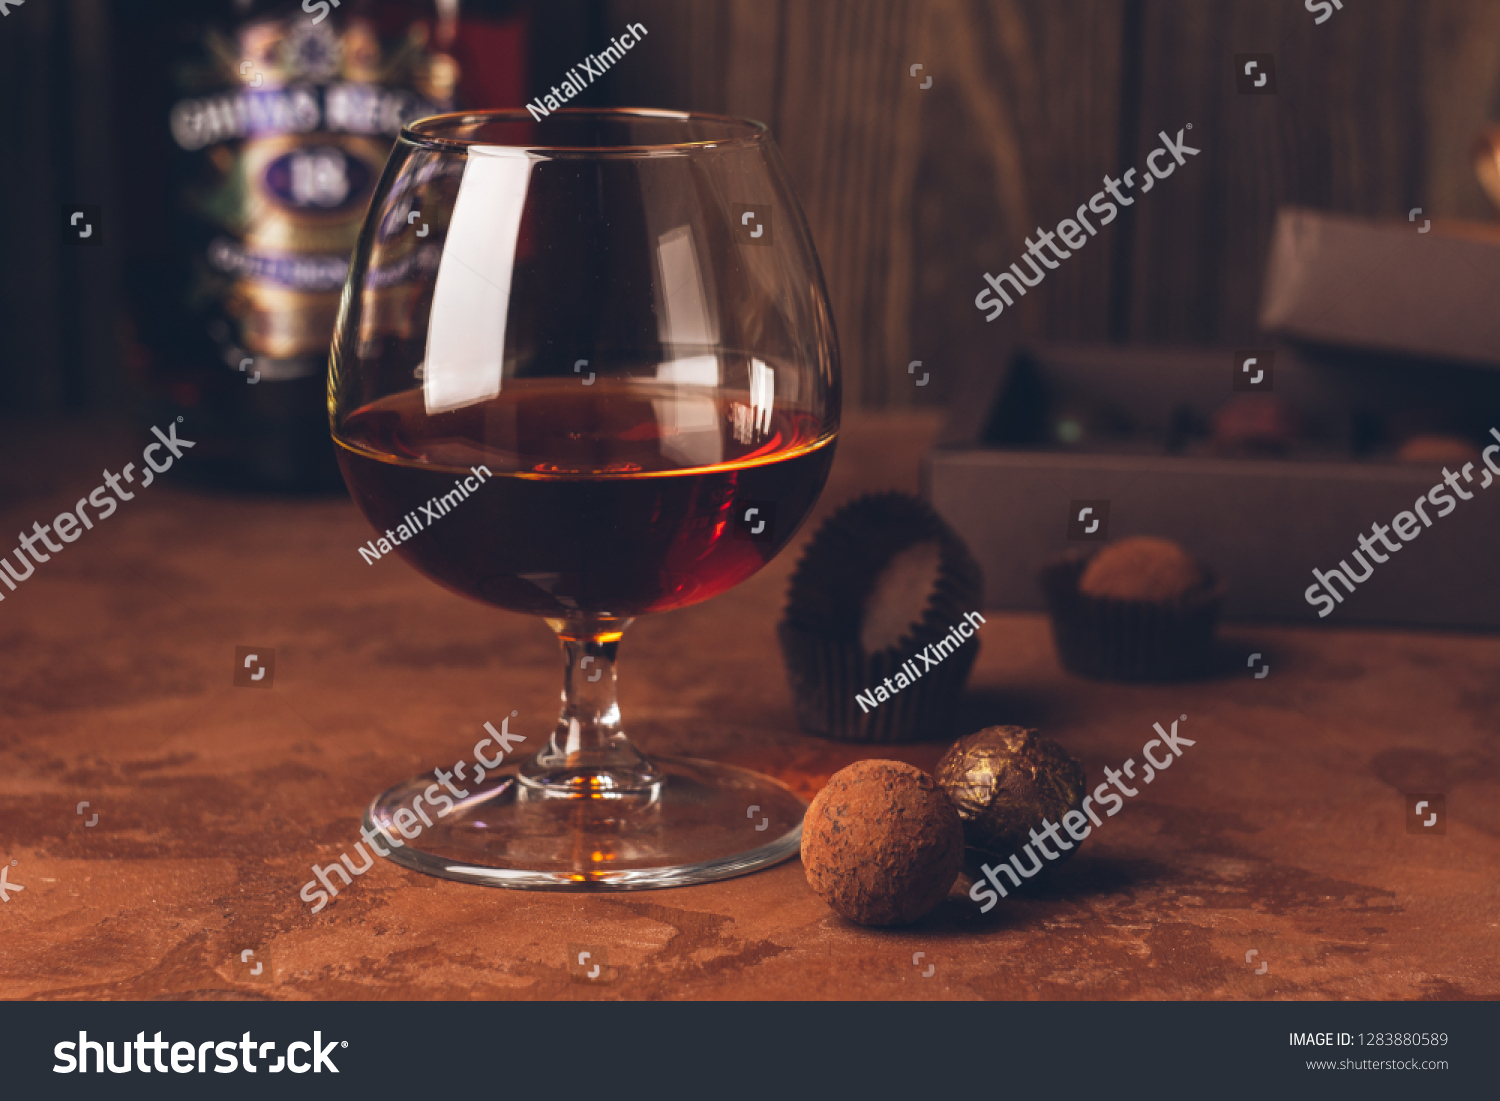 A glass of strong alcoholic drink brandy or brandy and a box of chocolates on a dark background. Copy space. #1283880589